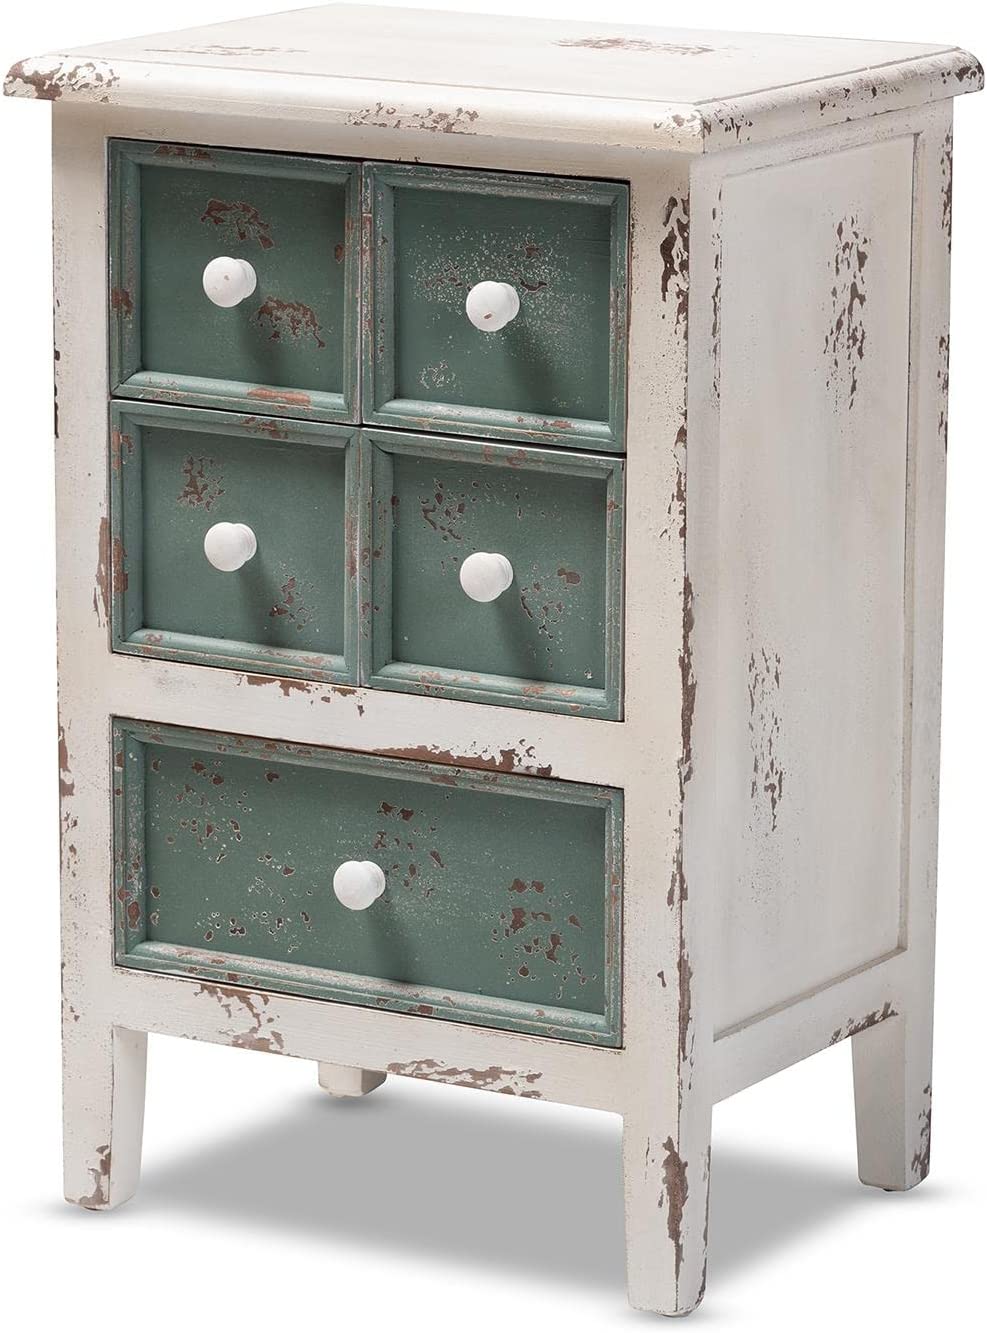 Baxton Studio Angeline Antique French Country Cottage Distressed White and Teal Finished Wood 5-Drawer Accent Chest